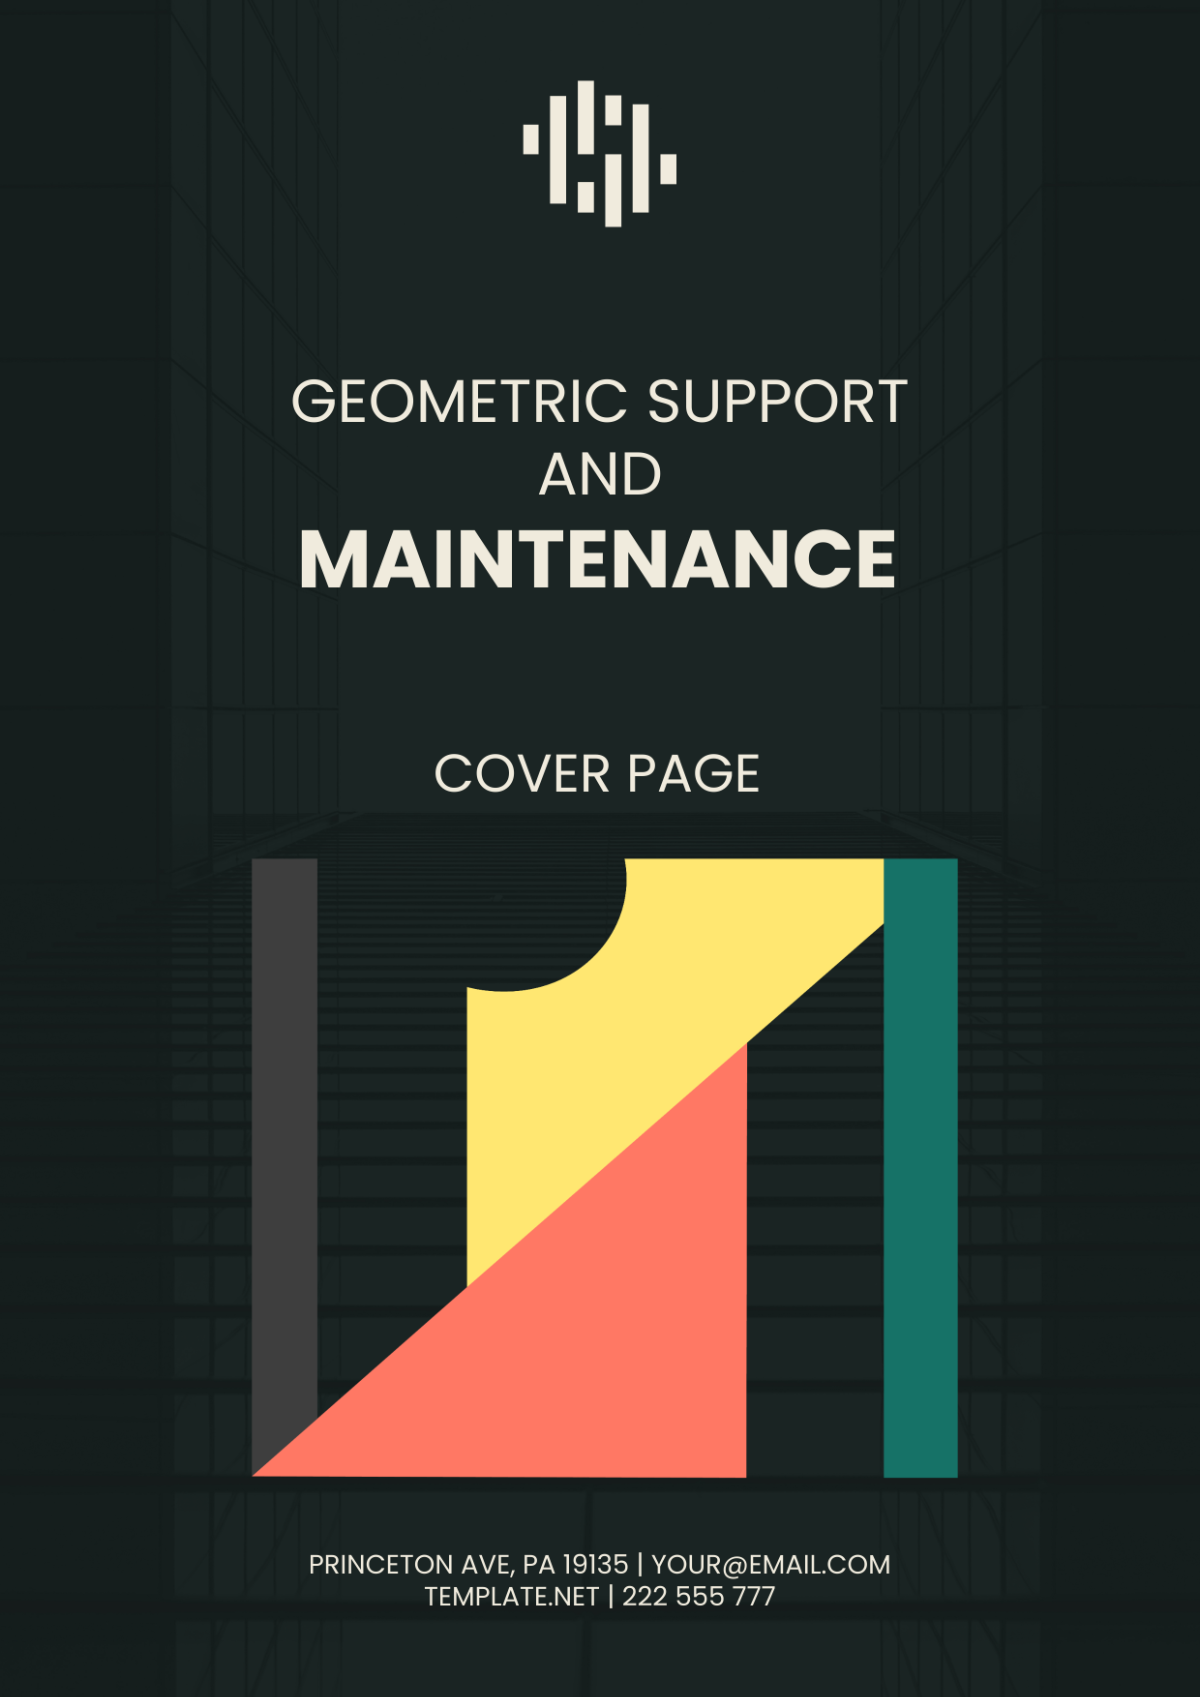 Geometric Support and Maintenance Cover Page